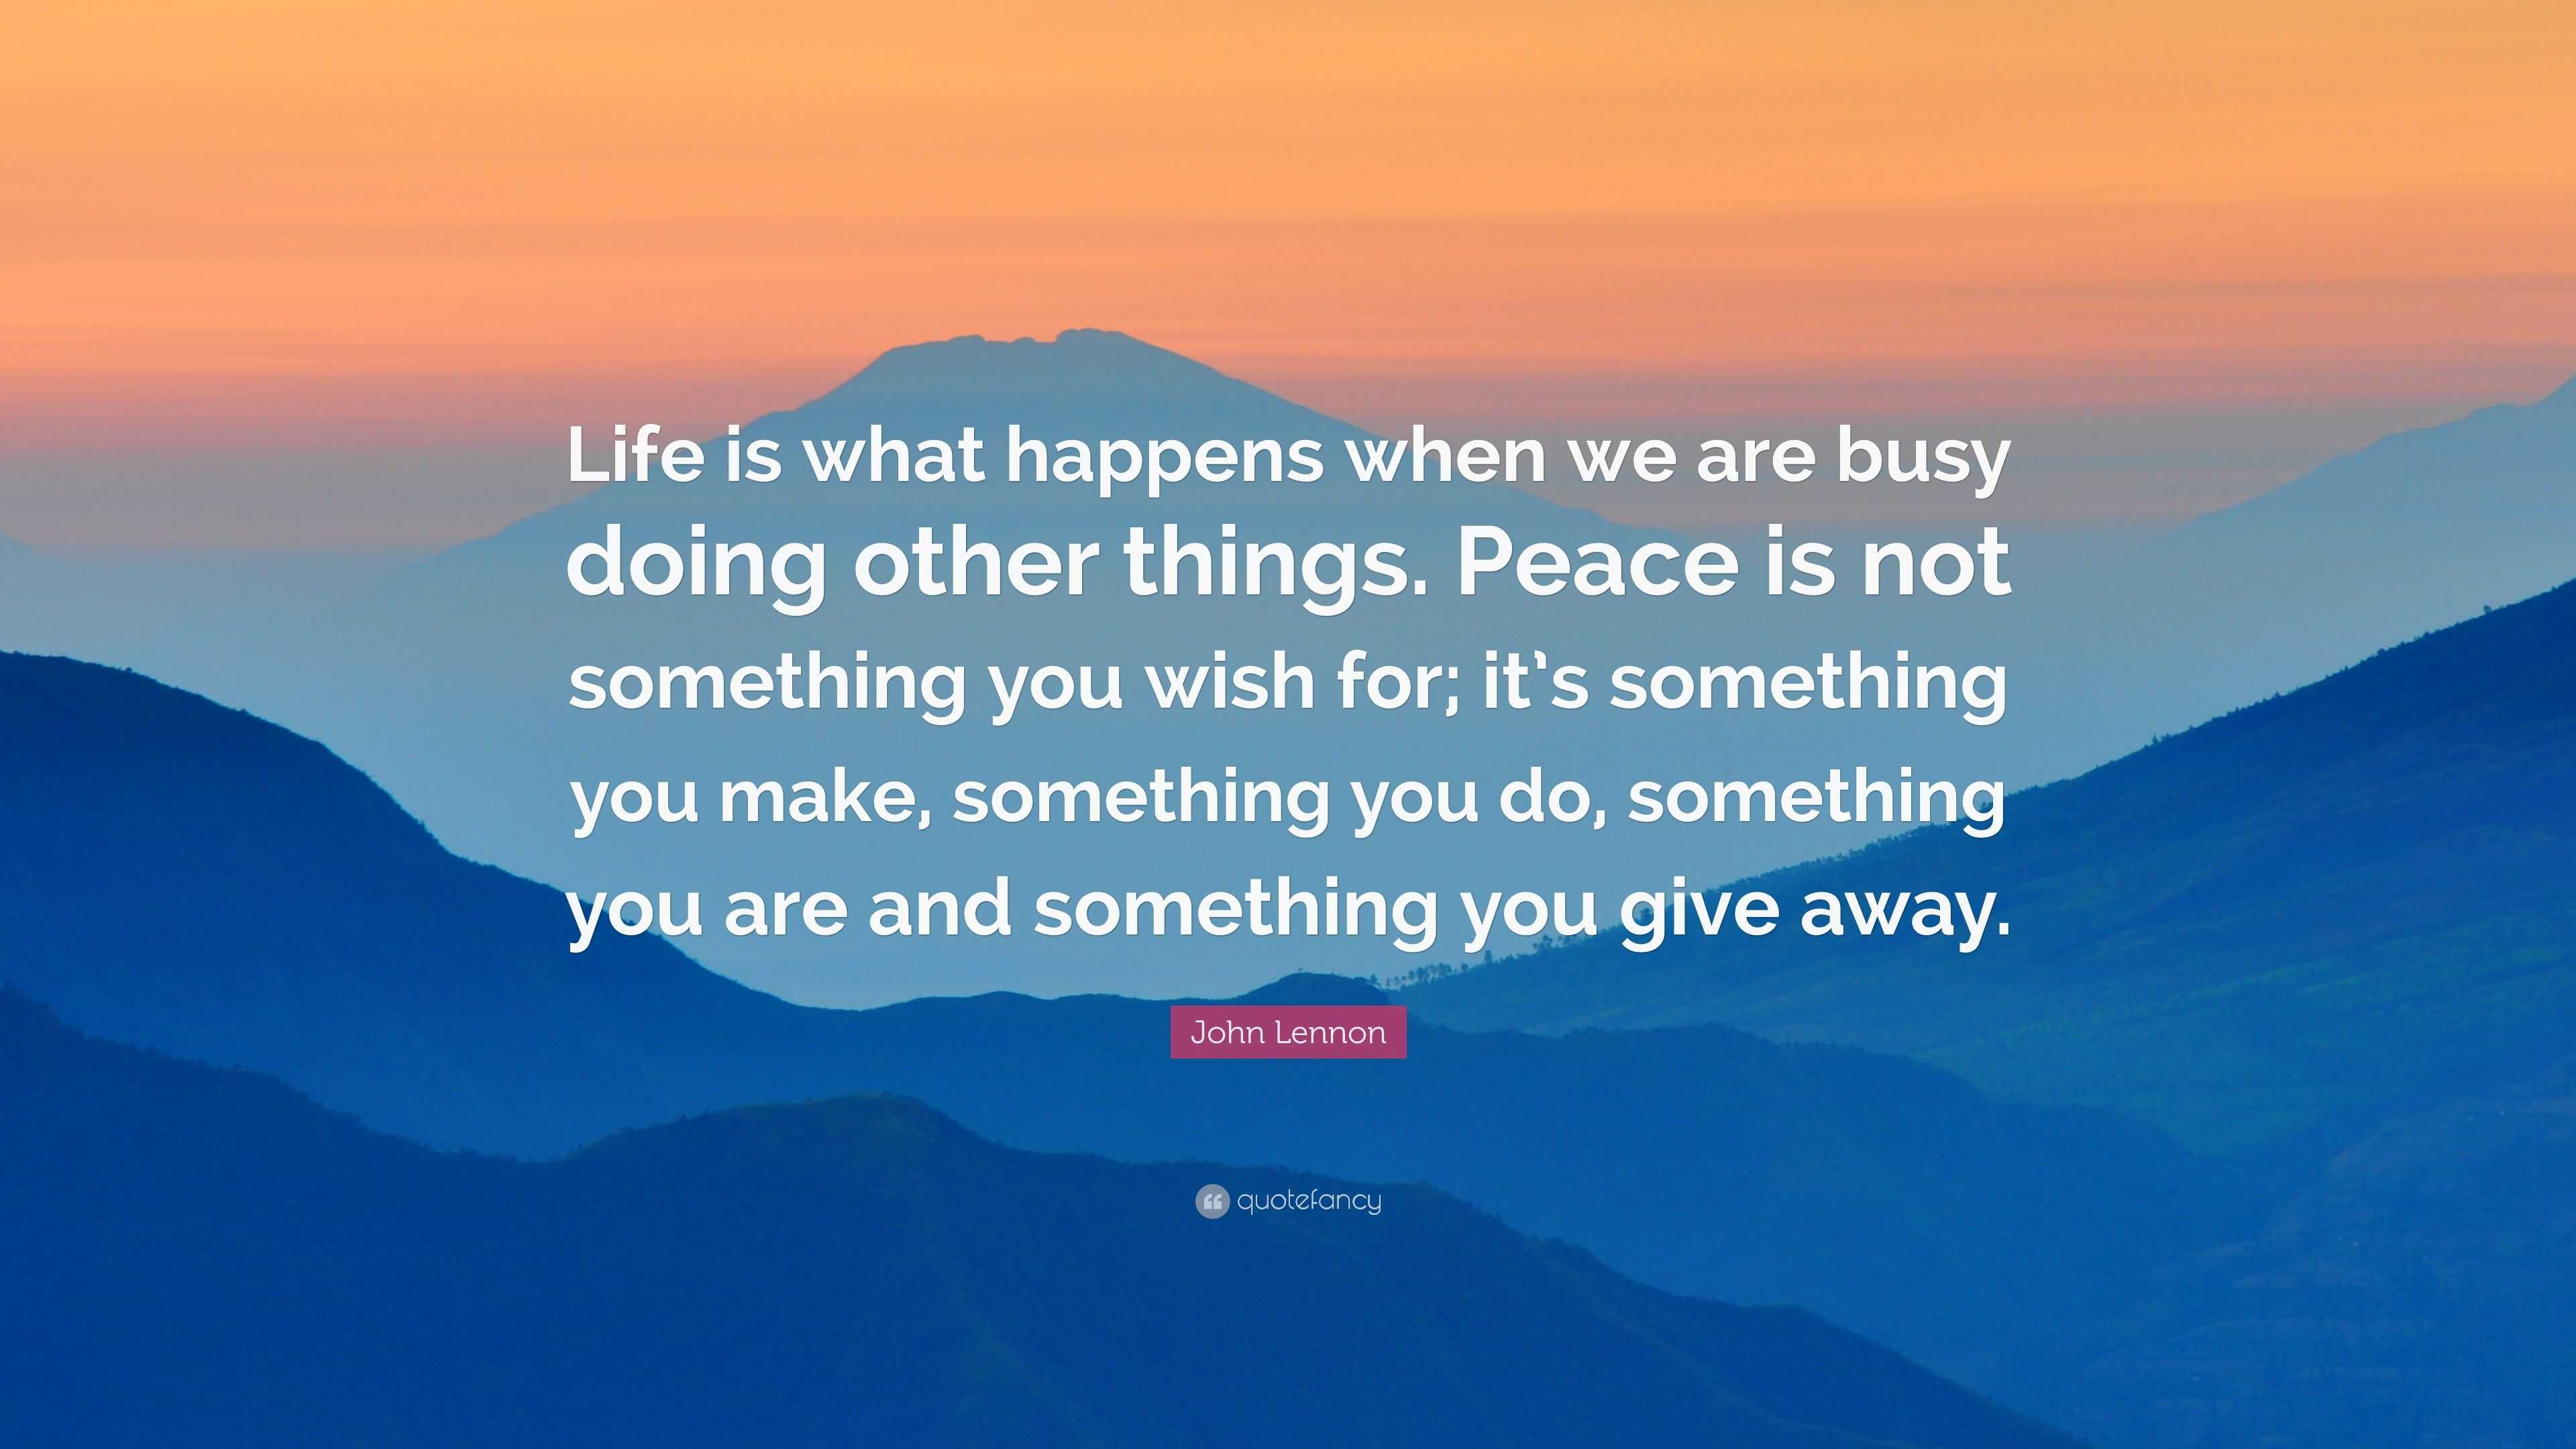 John Lennon Quote: “Life is what happens when we are busy doing other ...